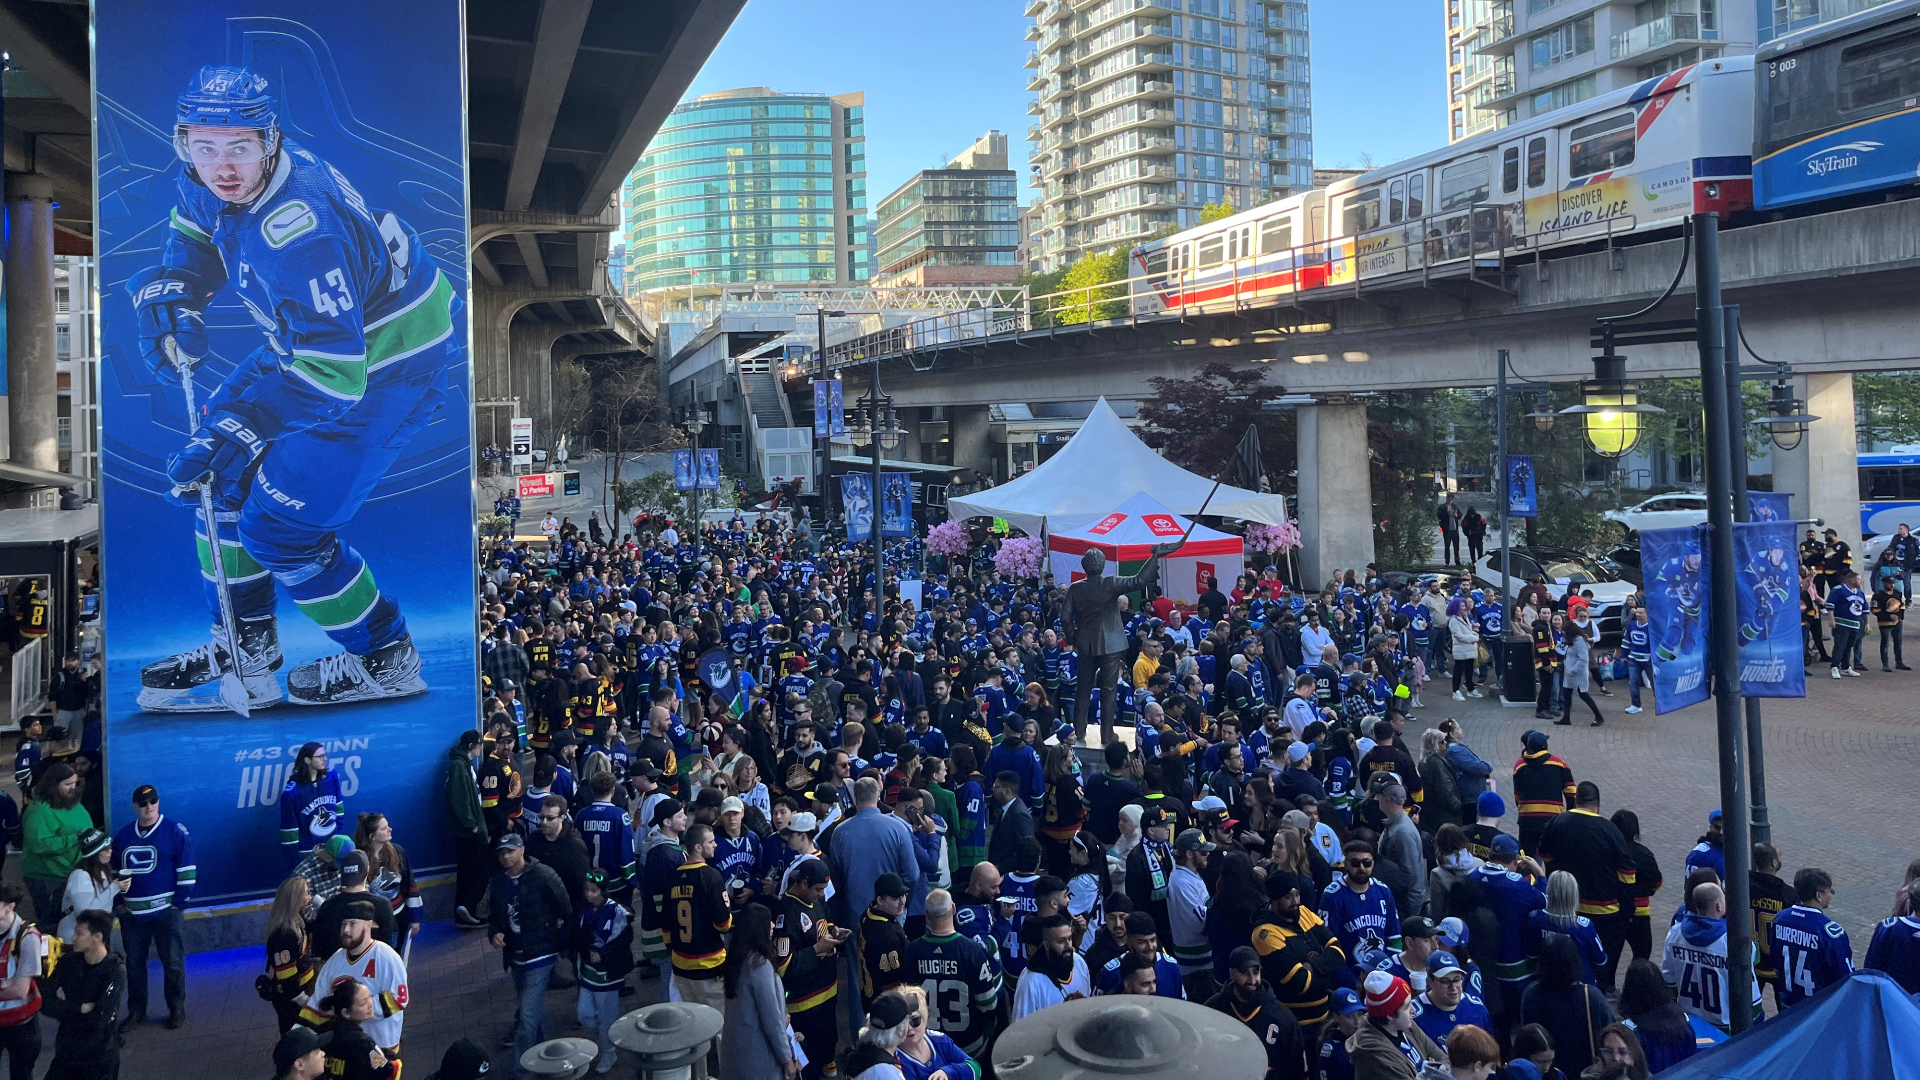 Canucks fans descend on Rogers Arena for Game 1 of Stanley Cup Playoffs